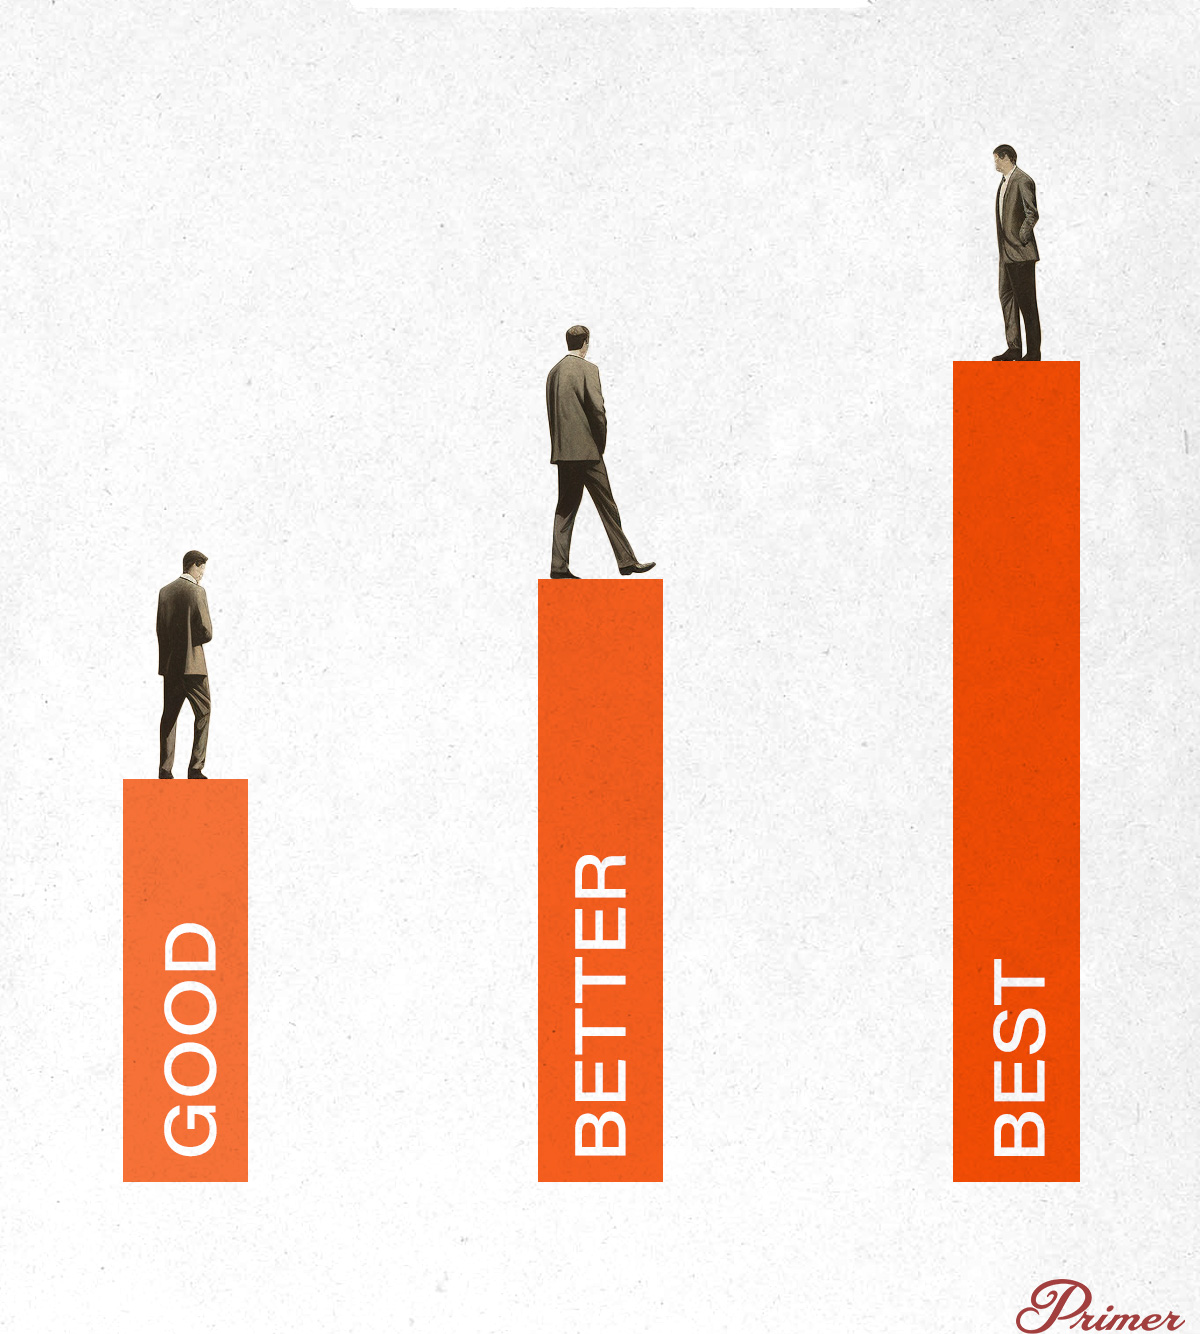 illustration of good, better, best habits showing a man at 3 different levels